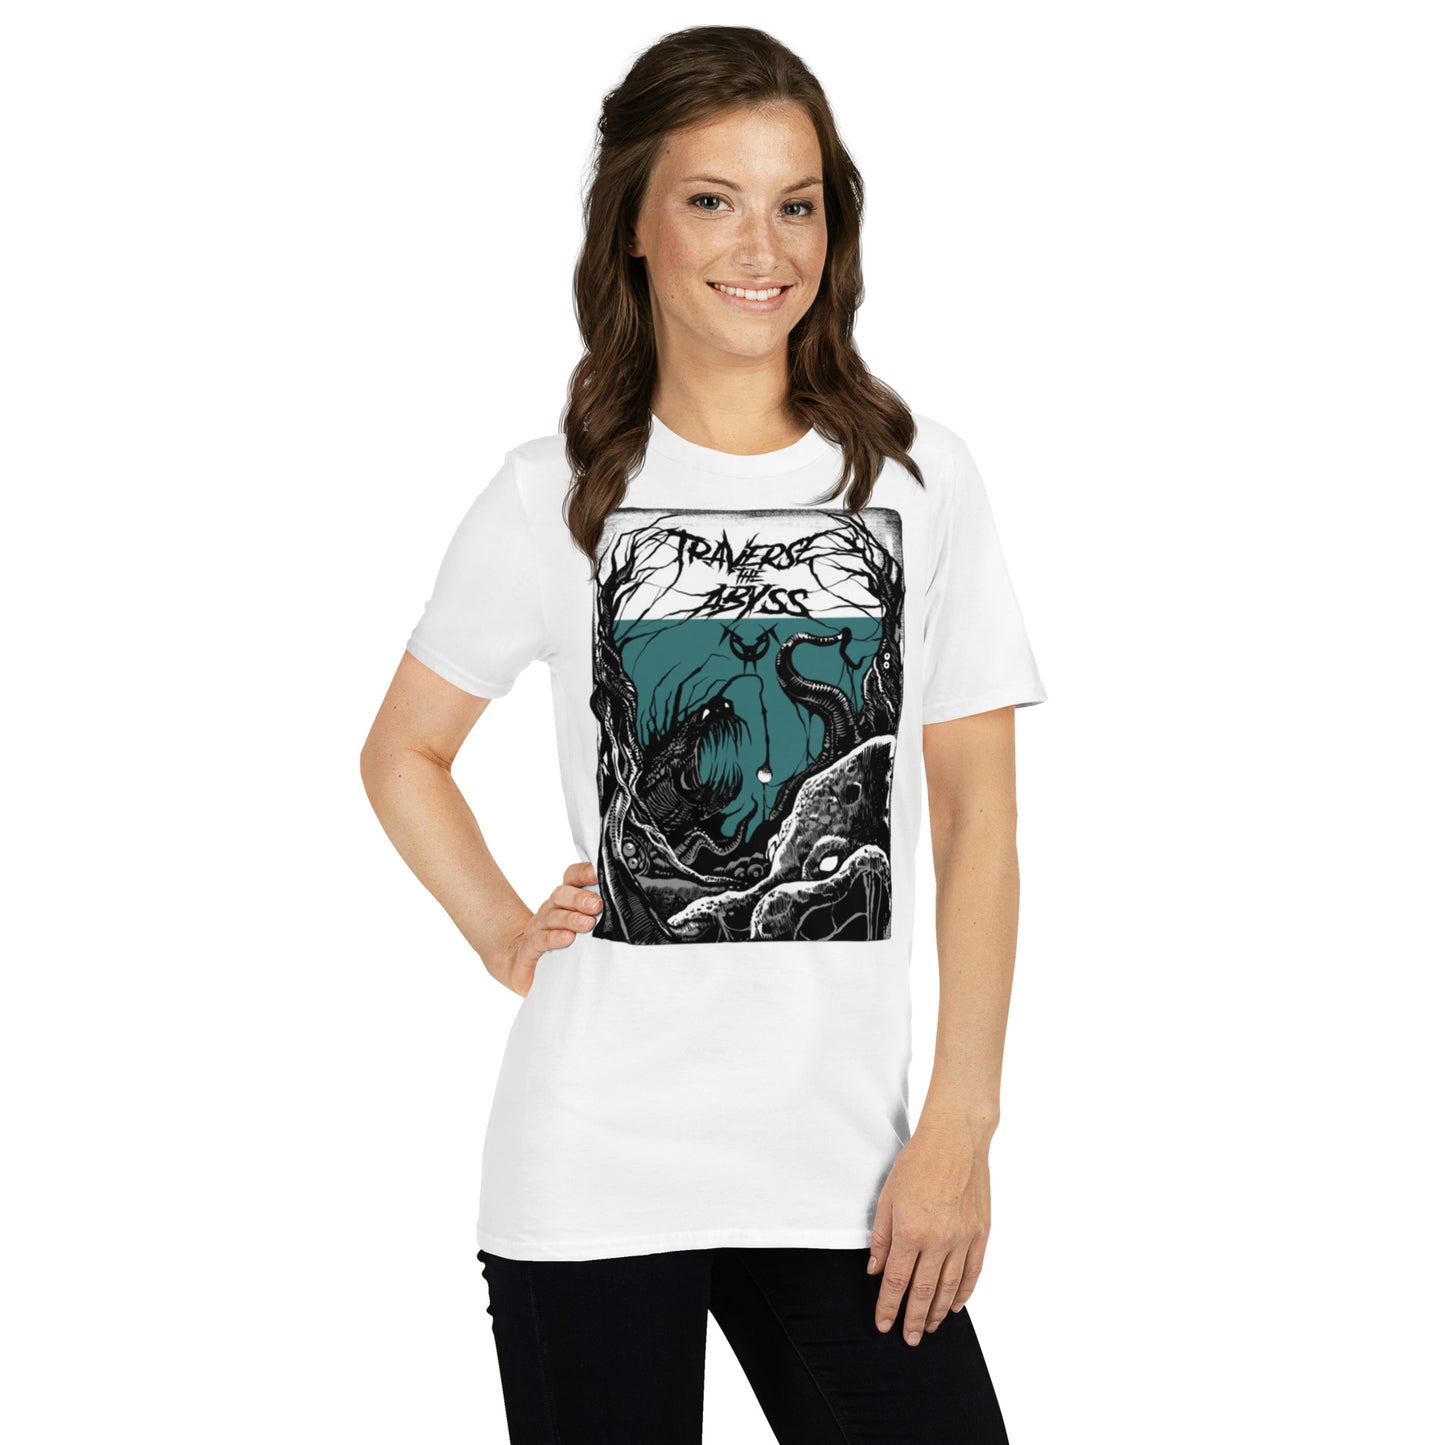 Traverse the Abyss - The Depths Short-Sleeve Unisex T-Shirt